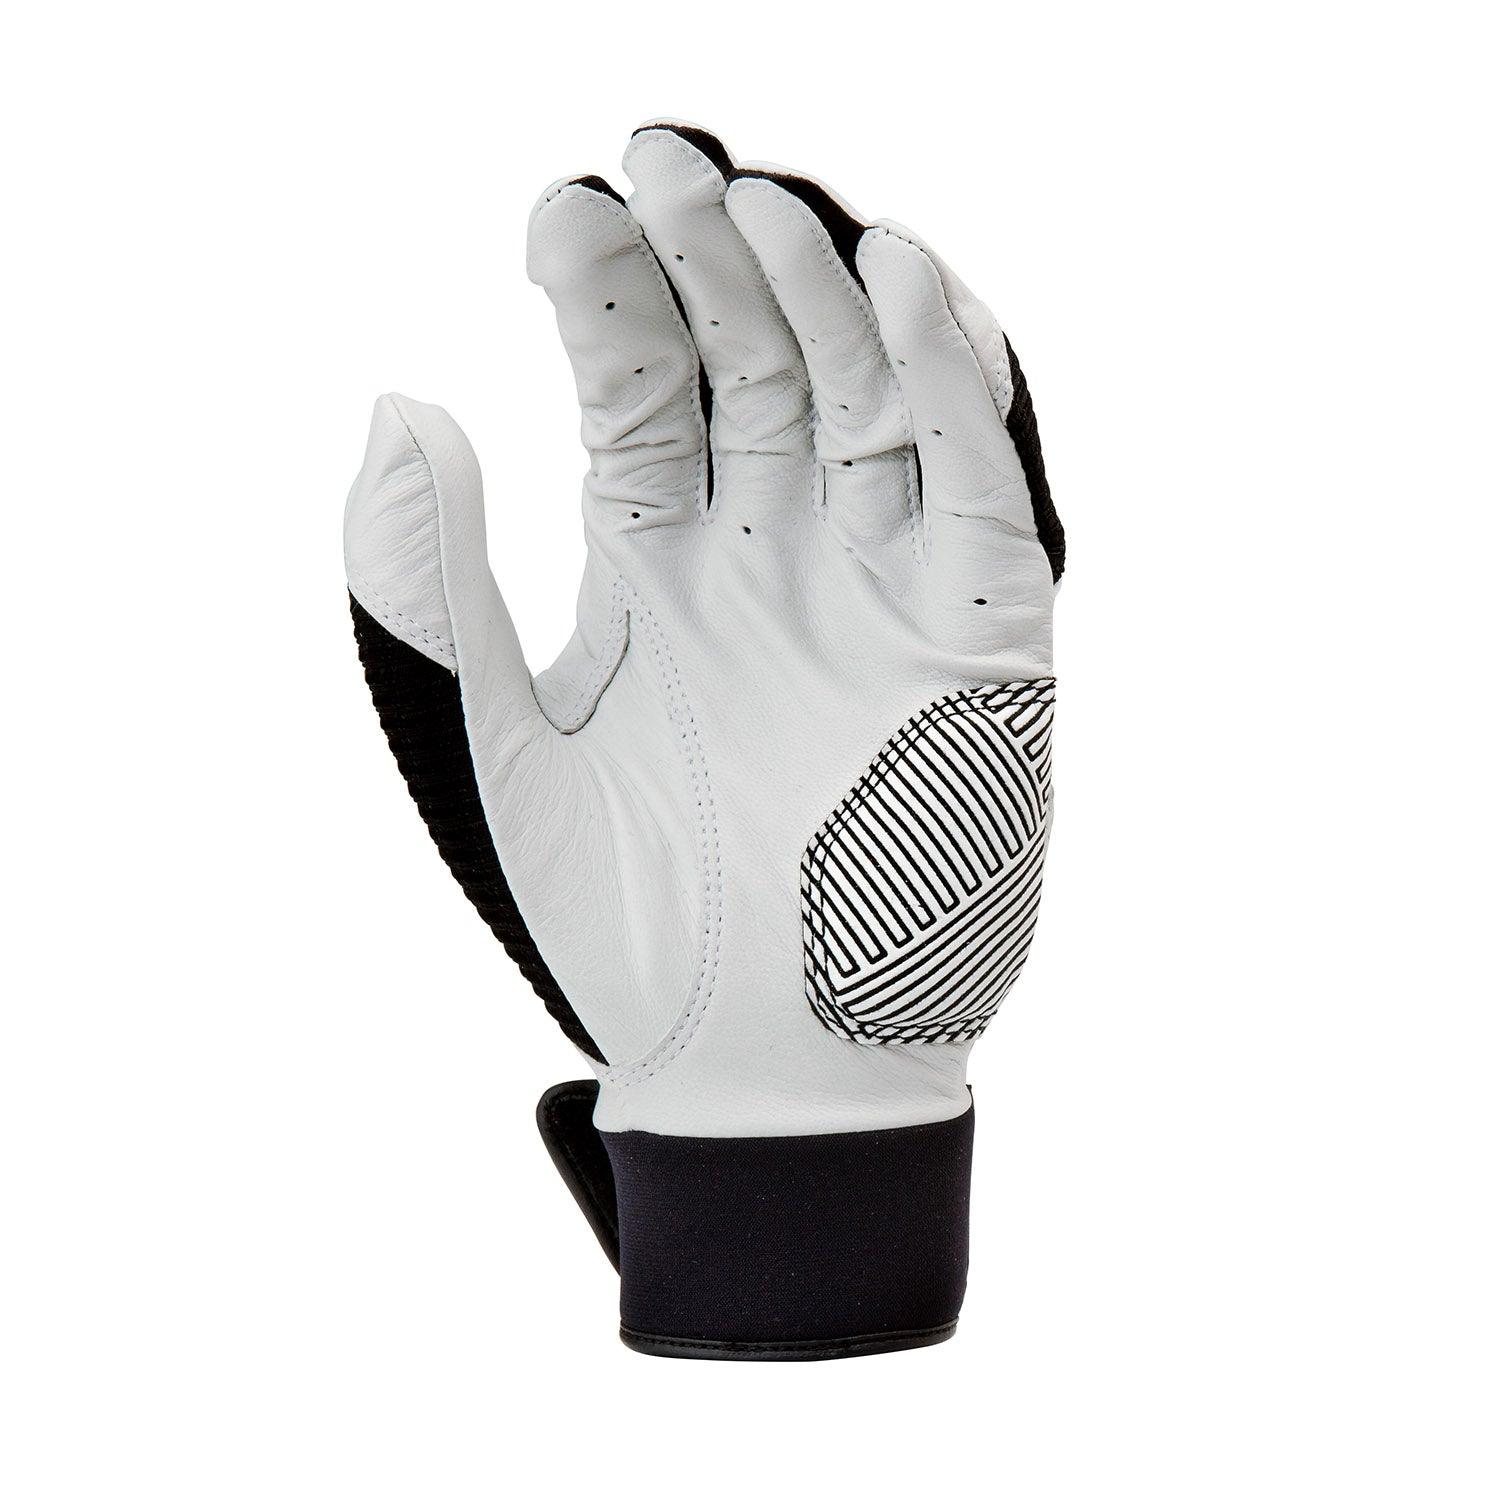 Workhorse Batting Glove Youth - Sports Excellence